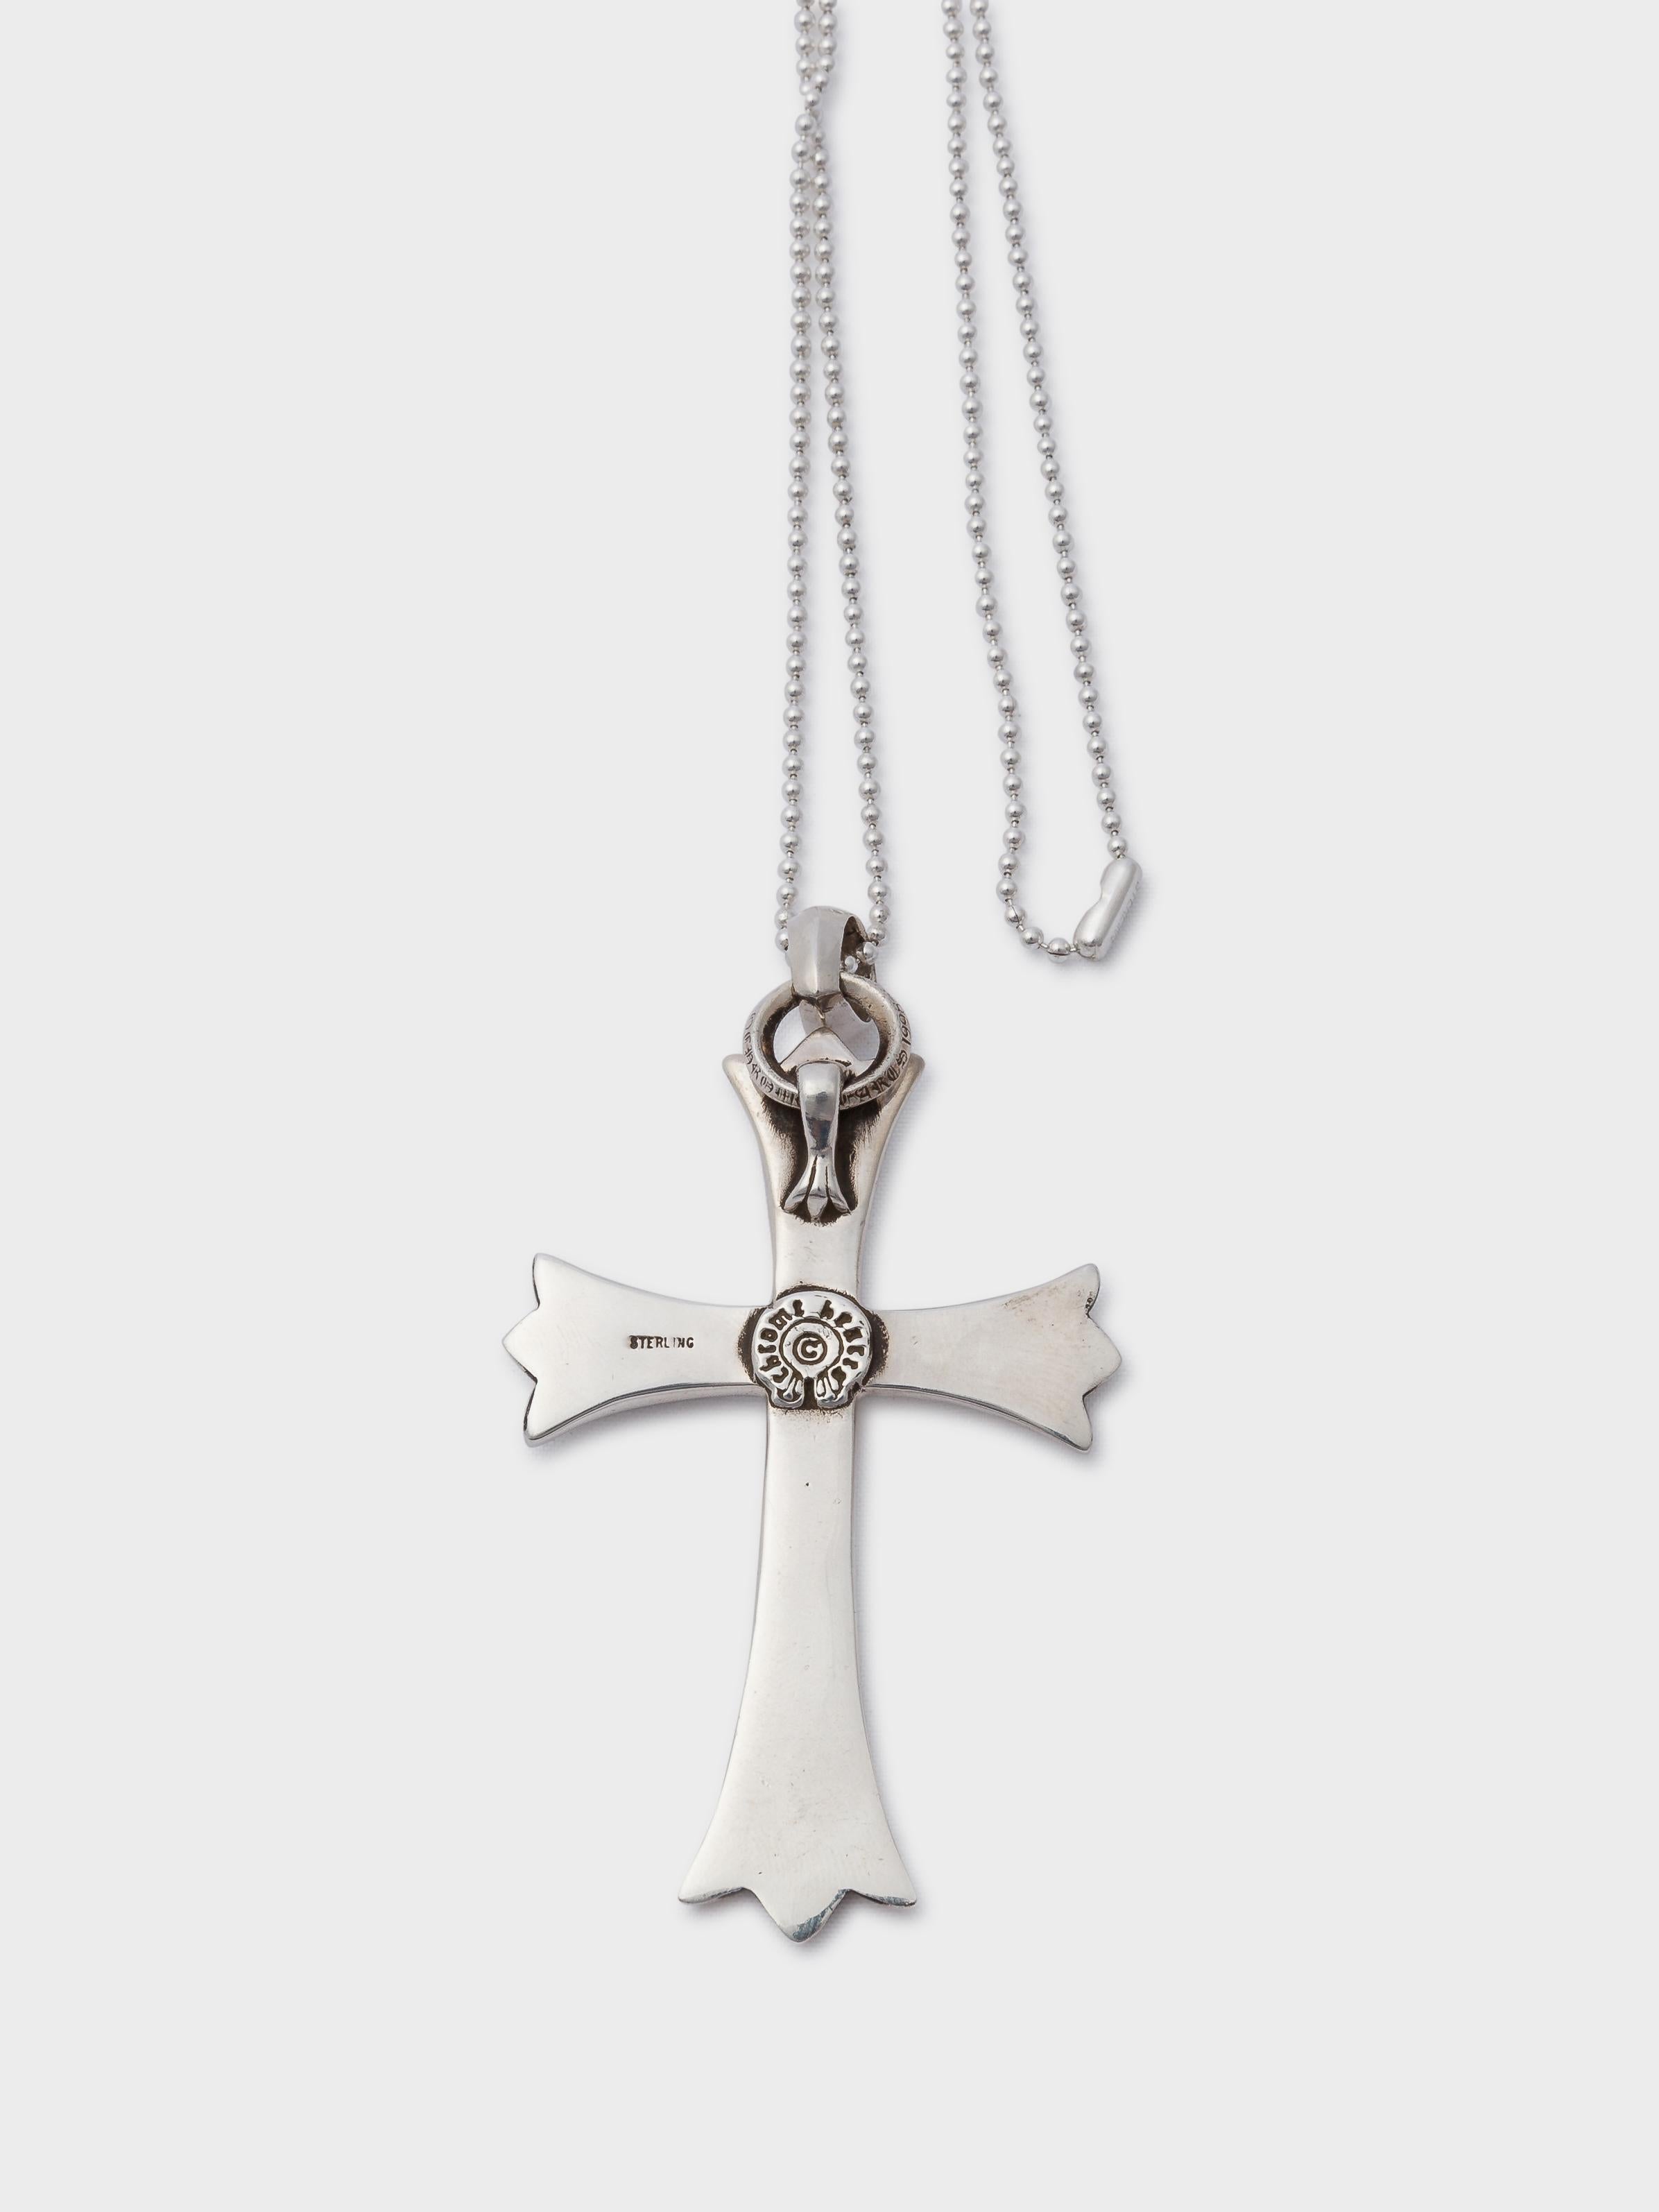 chrome hearts | Chrome hearts, Mens jewelry, Silver necklace